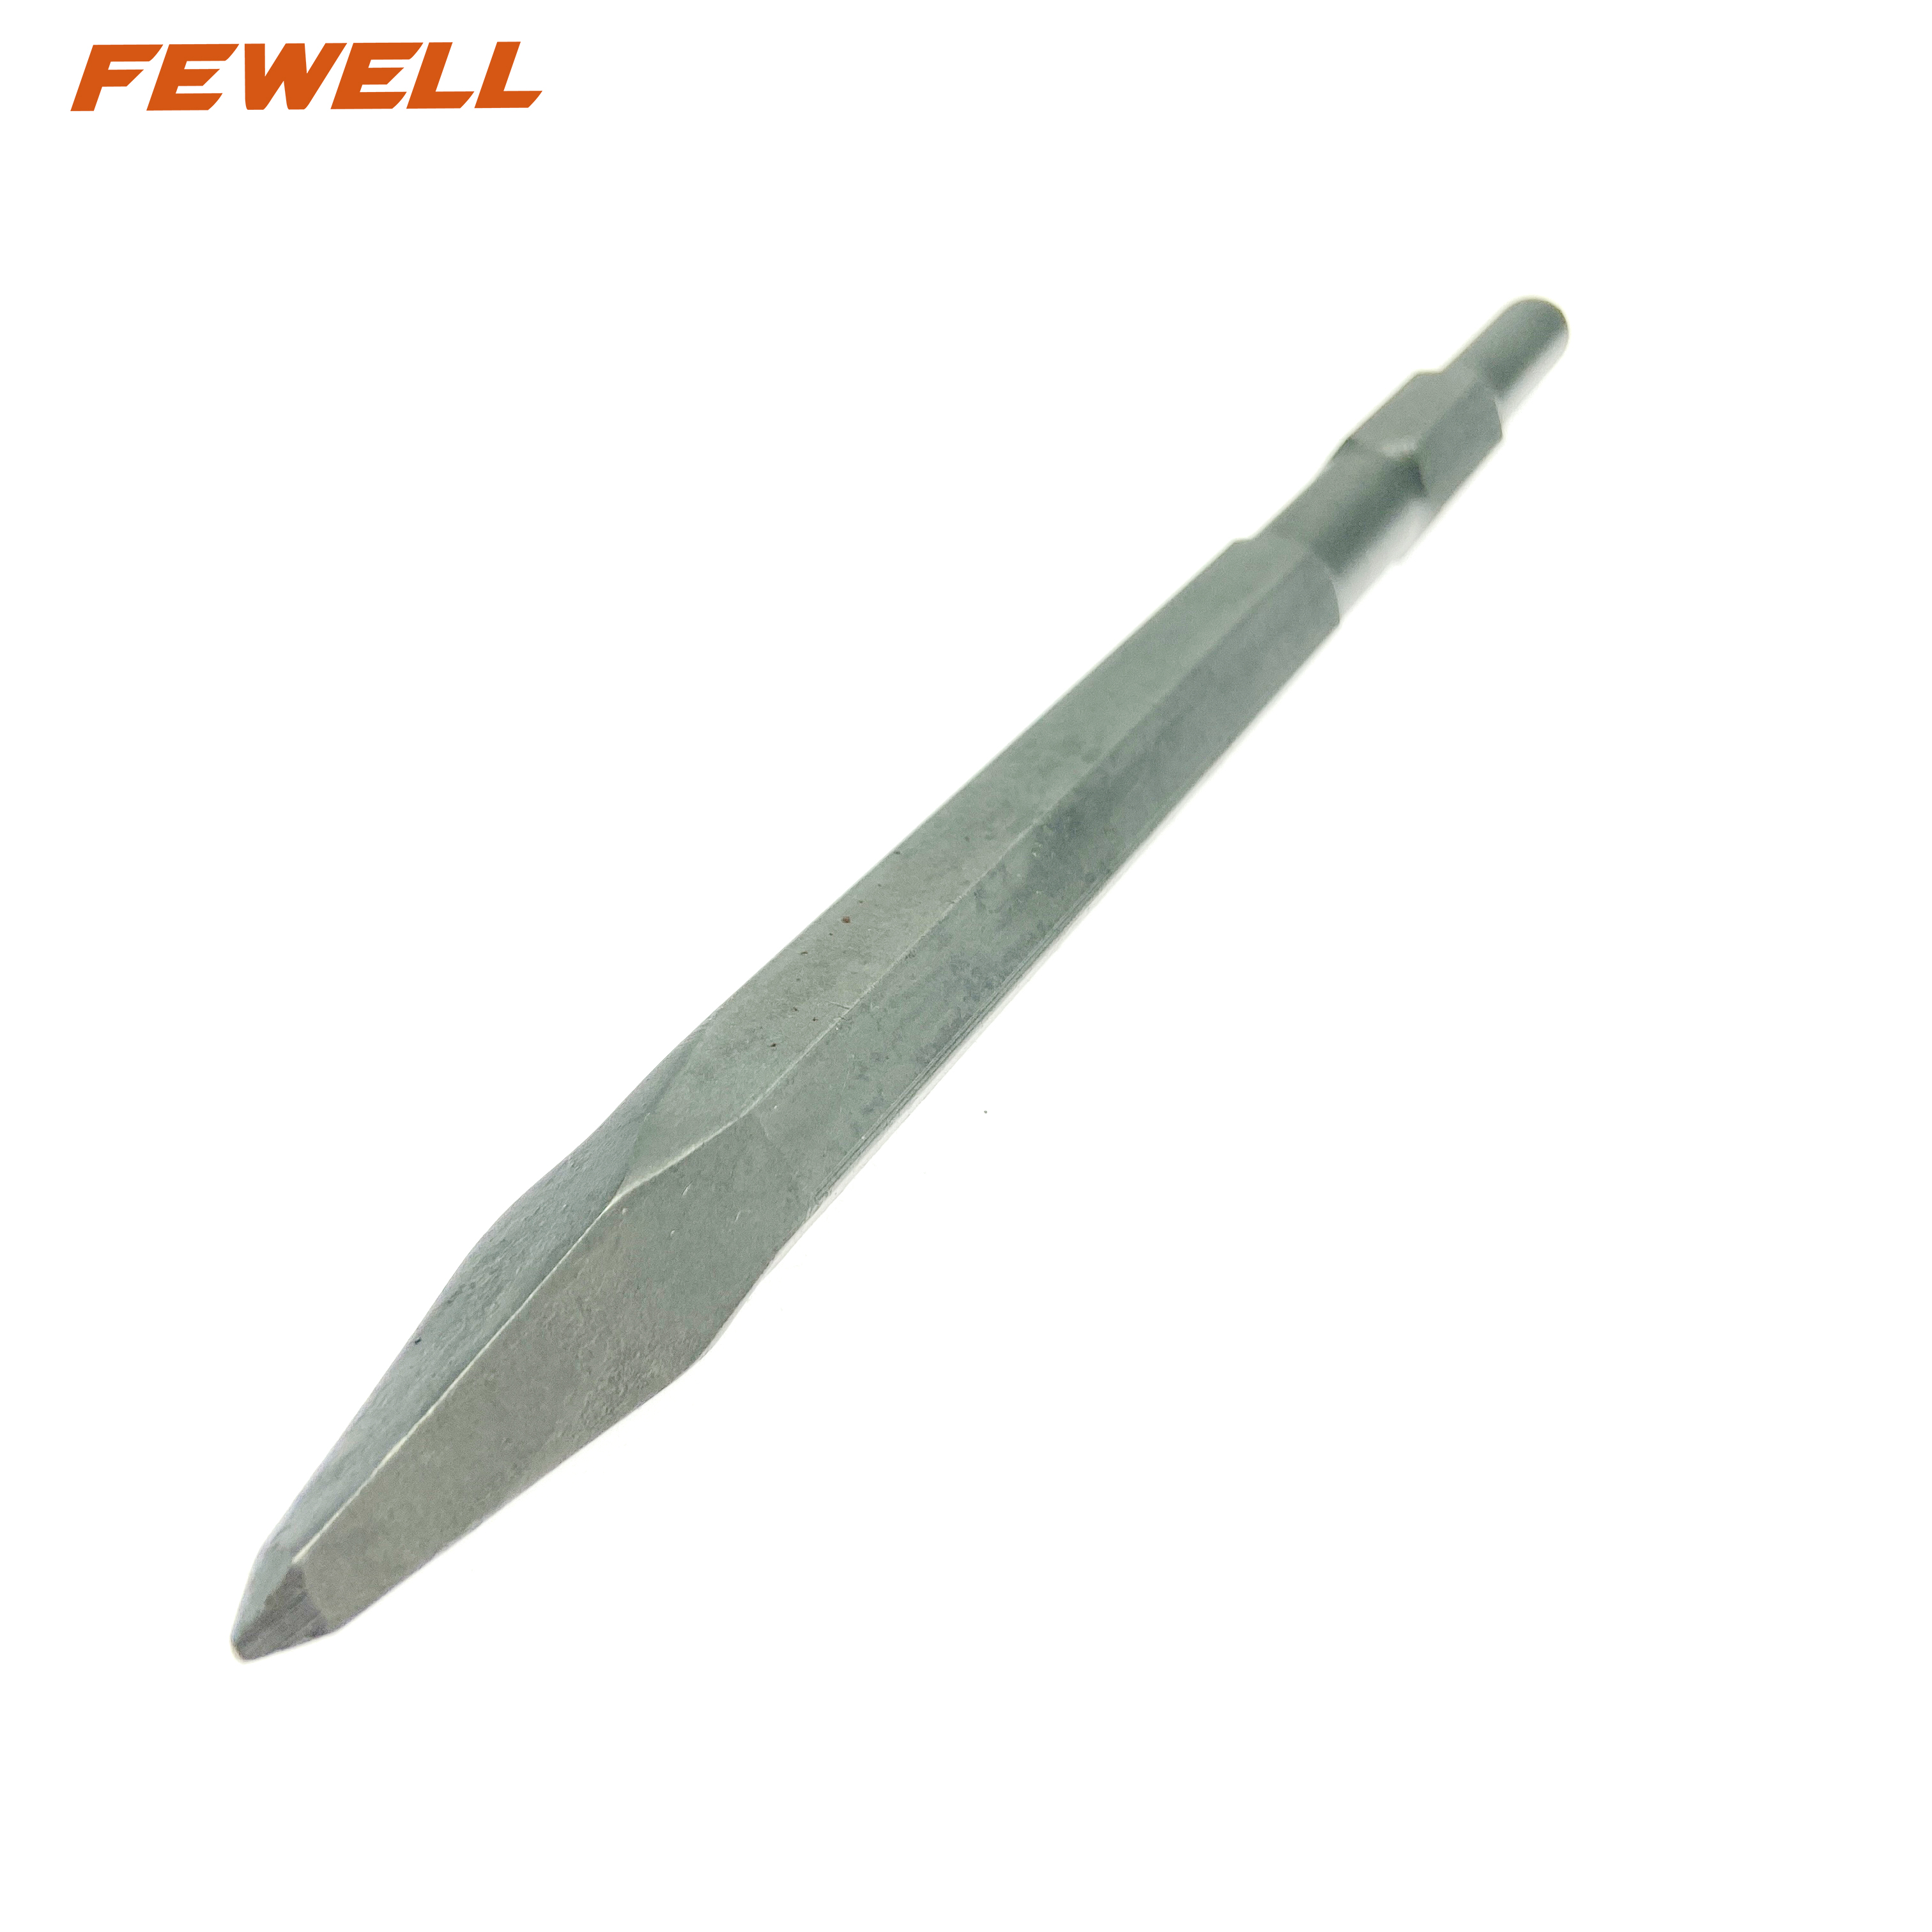 High quality 17mm Hex shank Electric hammer drill bit point chisel for Tile Masonry Concrete Brick stone